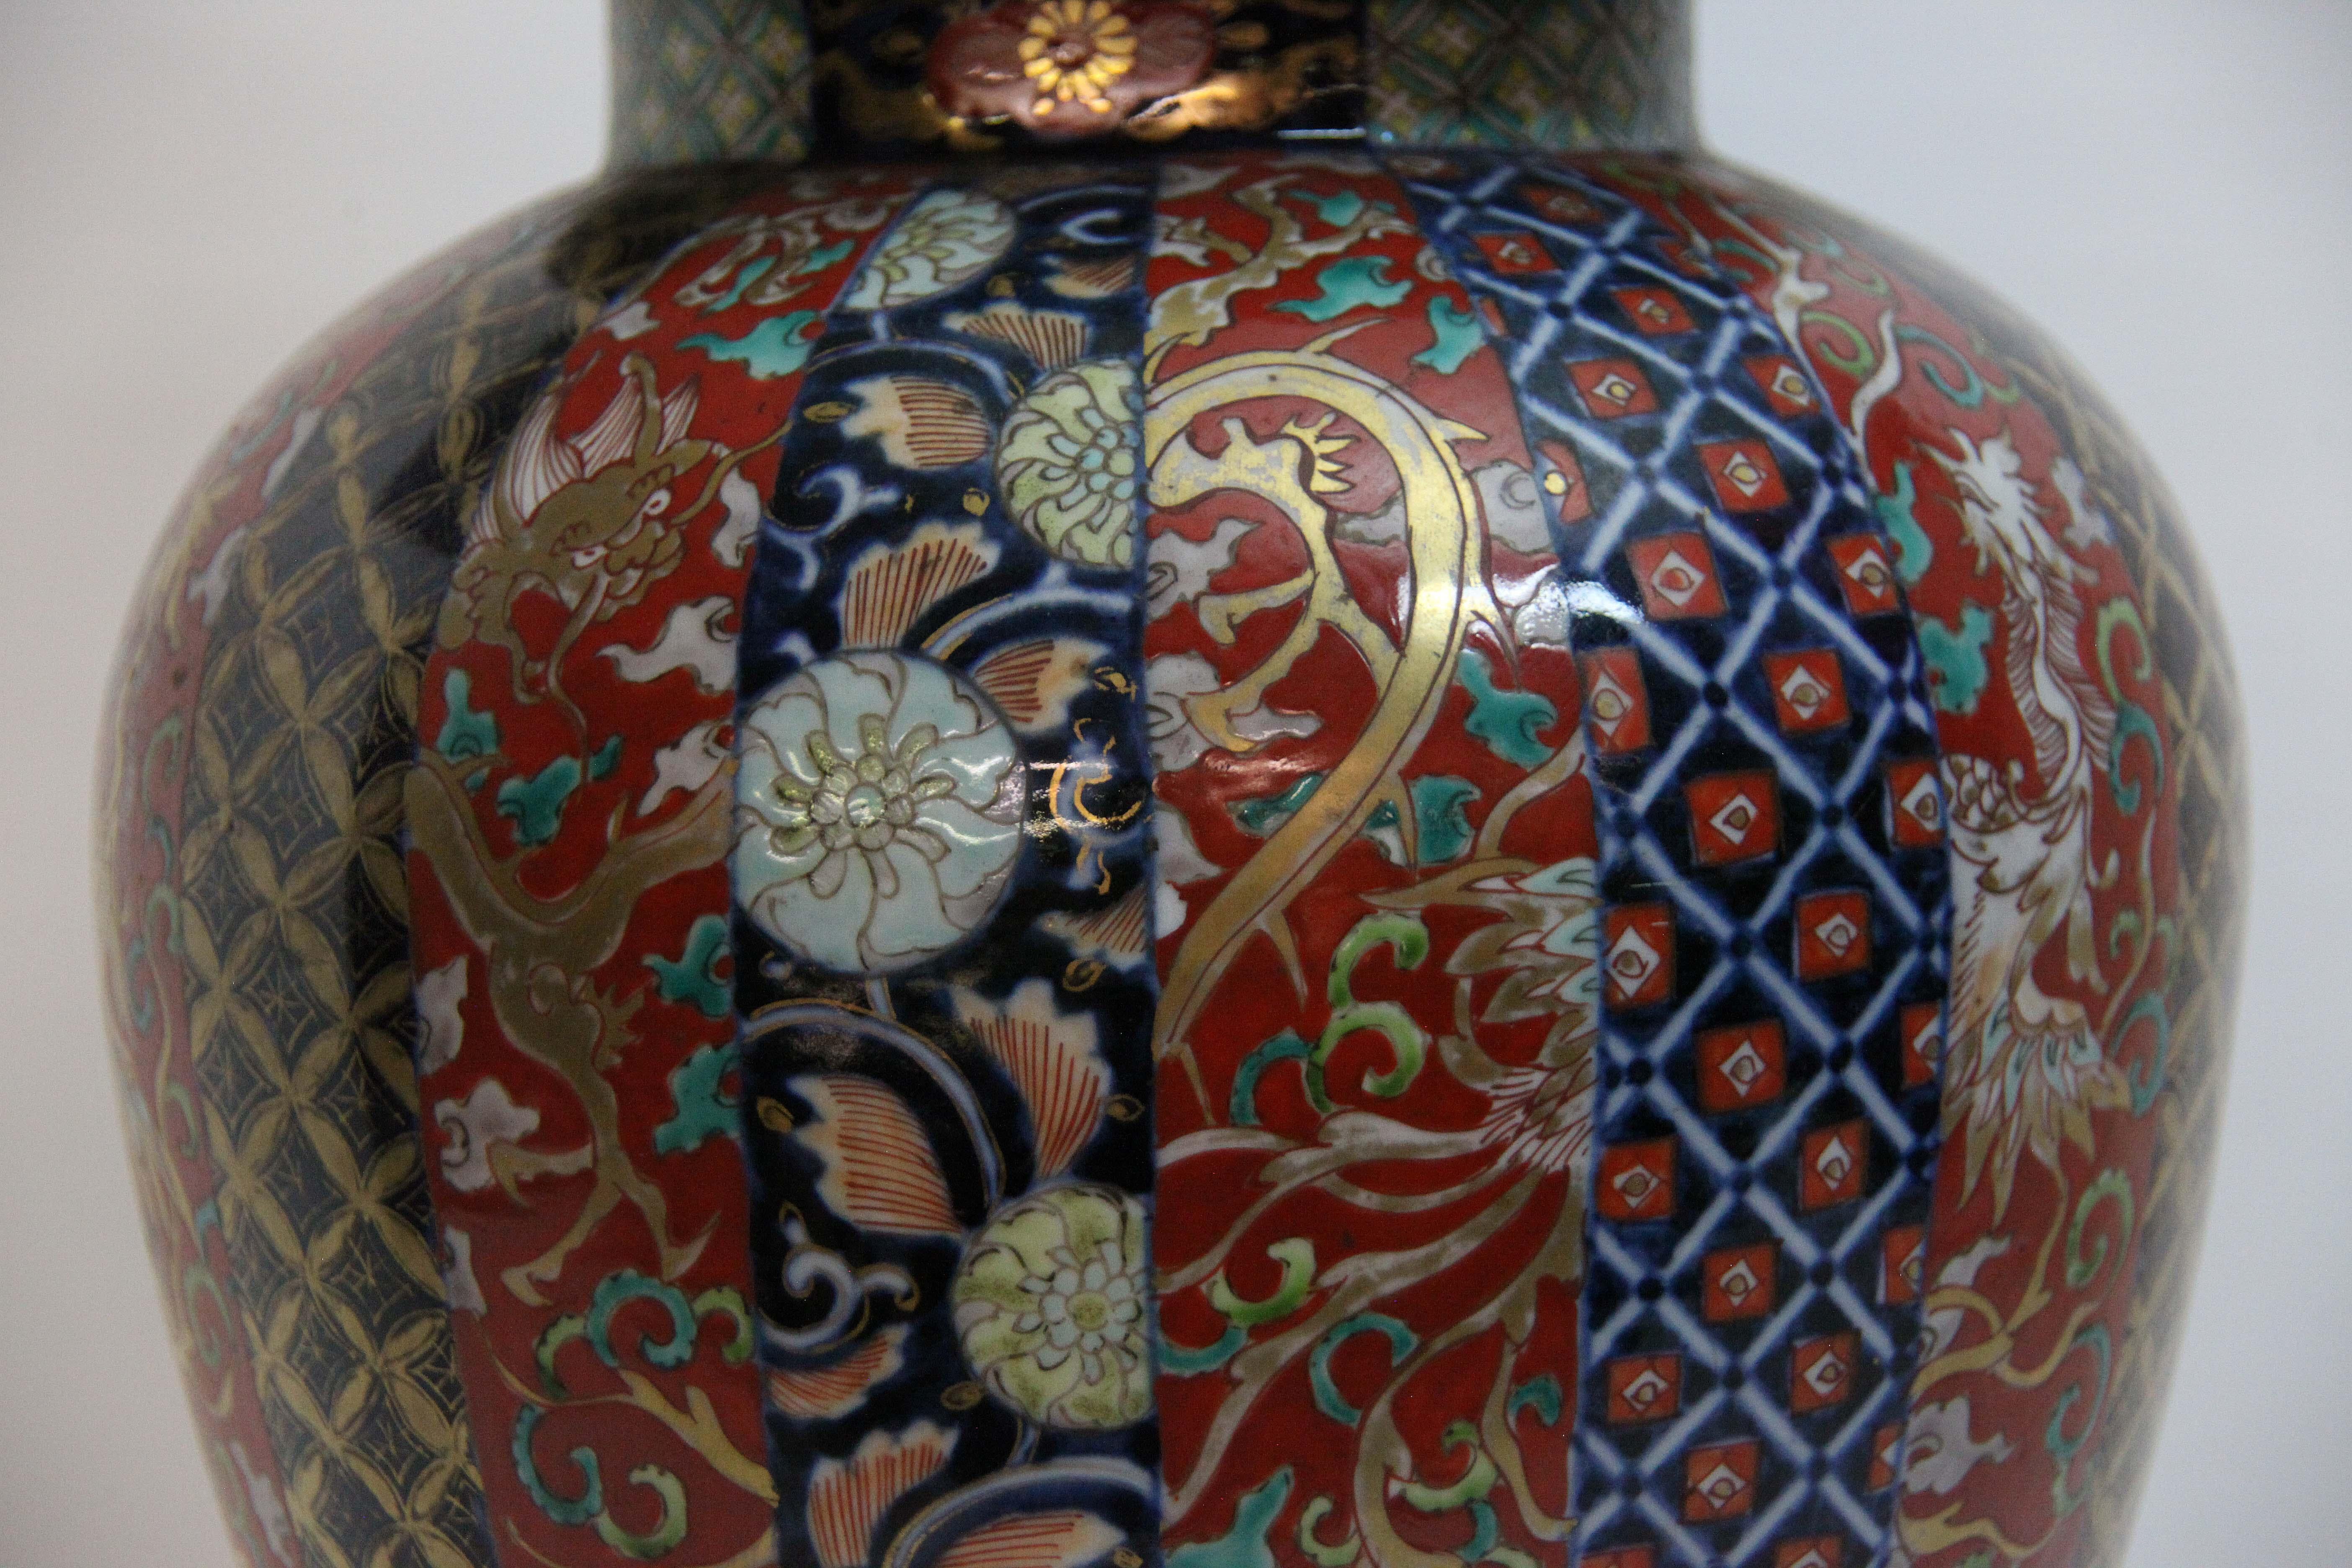 19th century Japanese Imari Temple jar and lid, the baluster form base with repeating vertical stylized designs, the dome lid with the same designs, all in typical Imari colors and patterns.